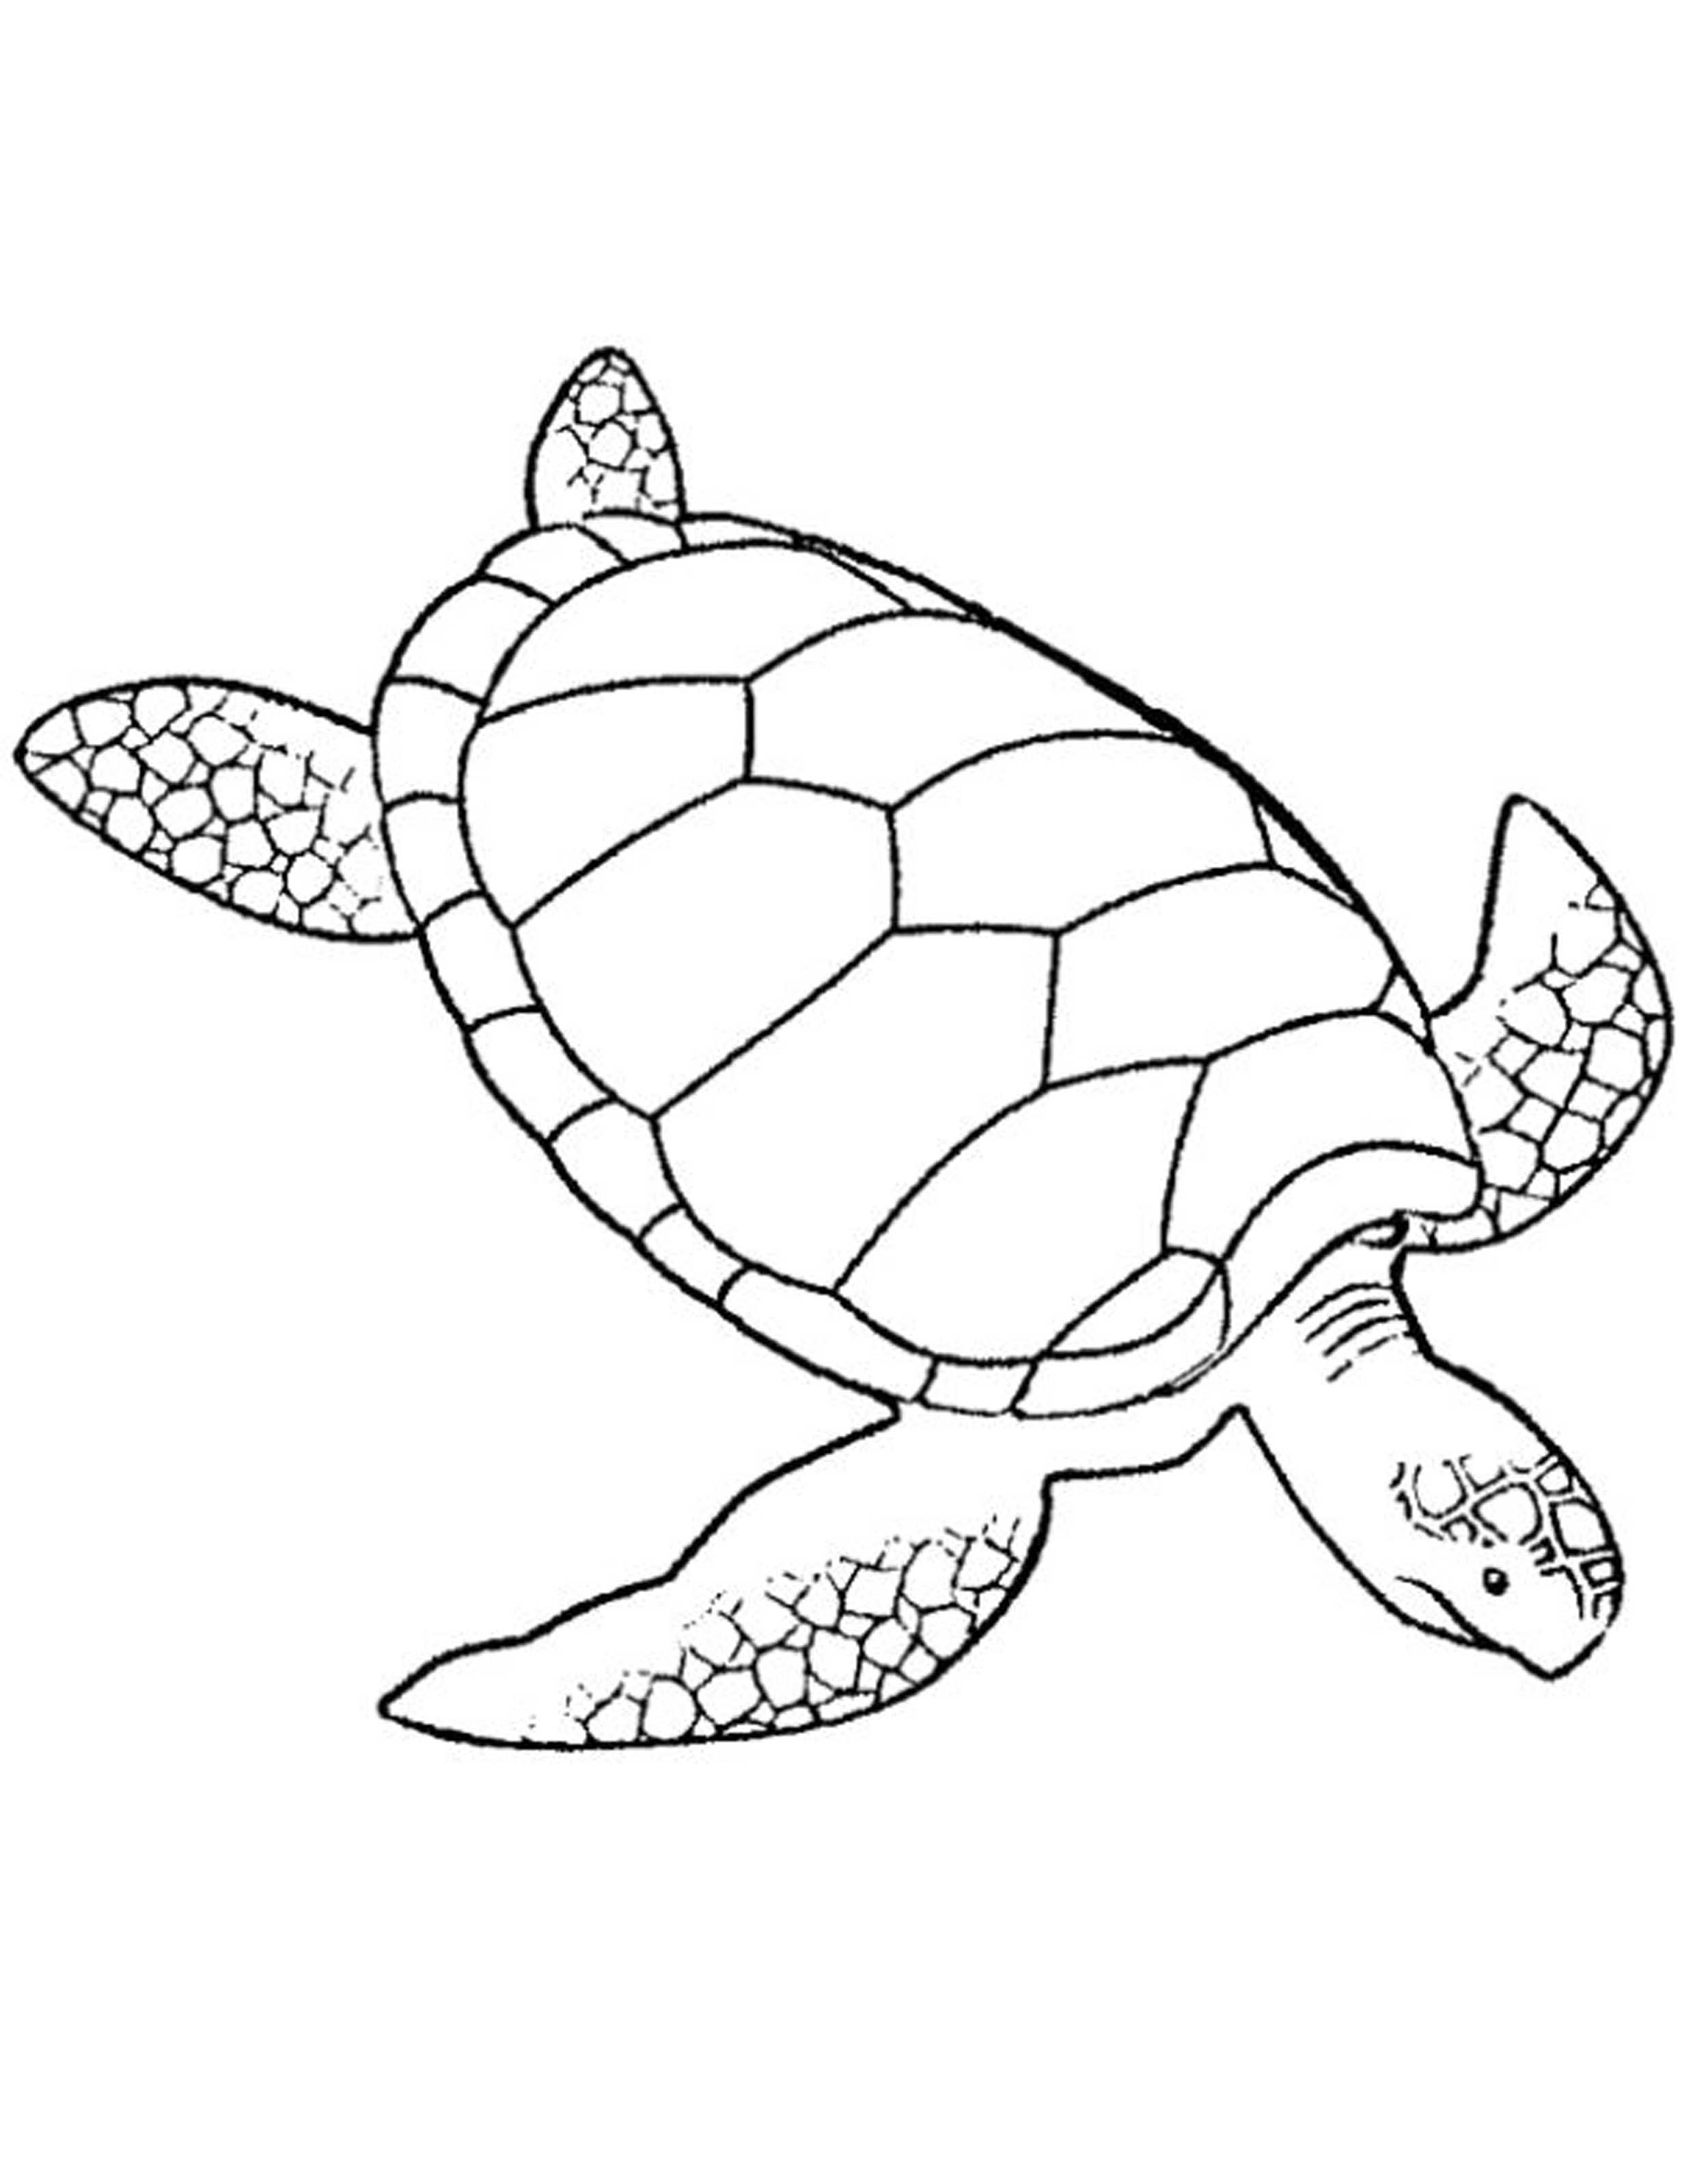 Print & Download Turtle Coloring Pages as the